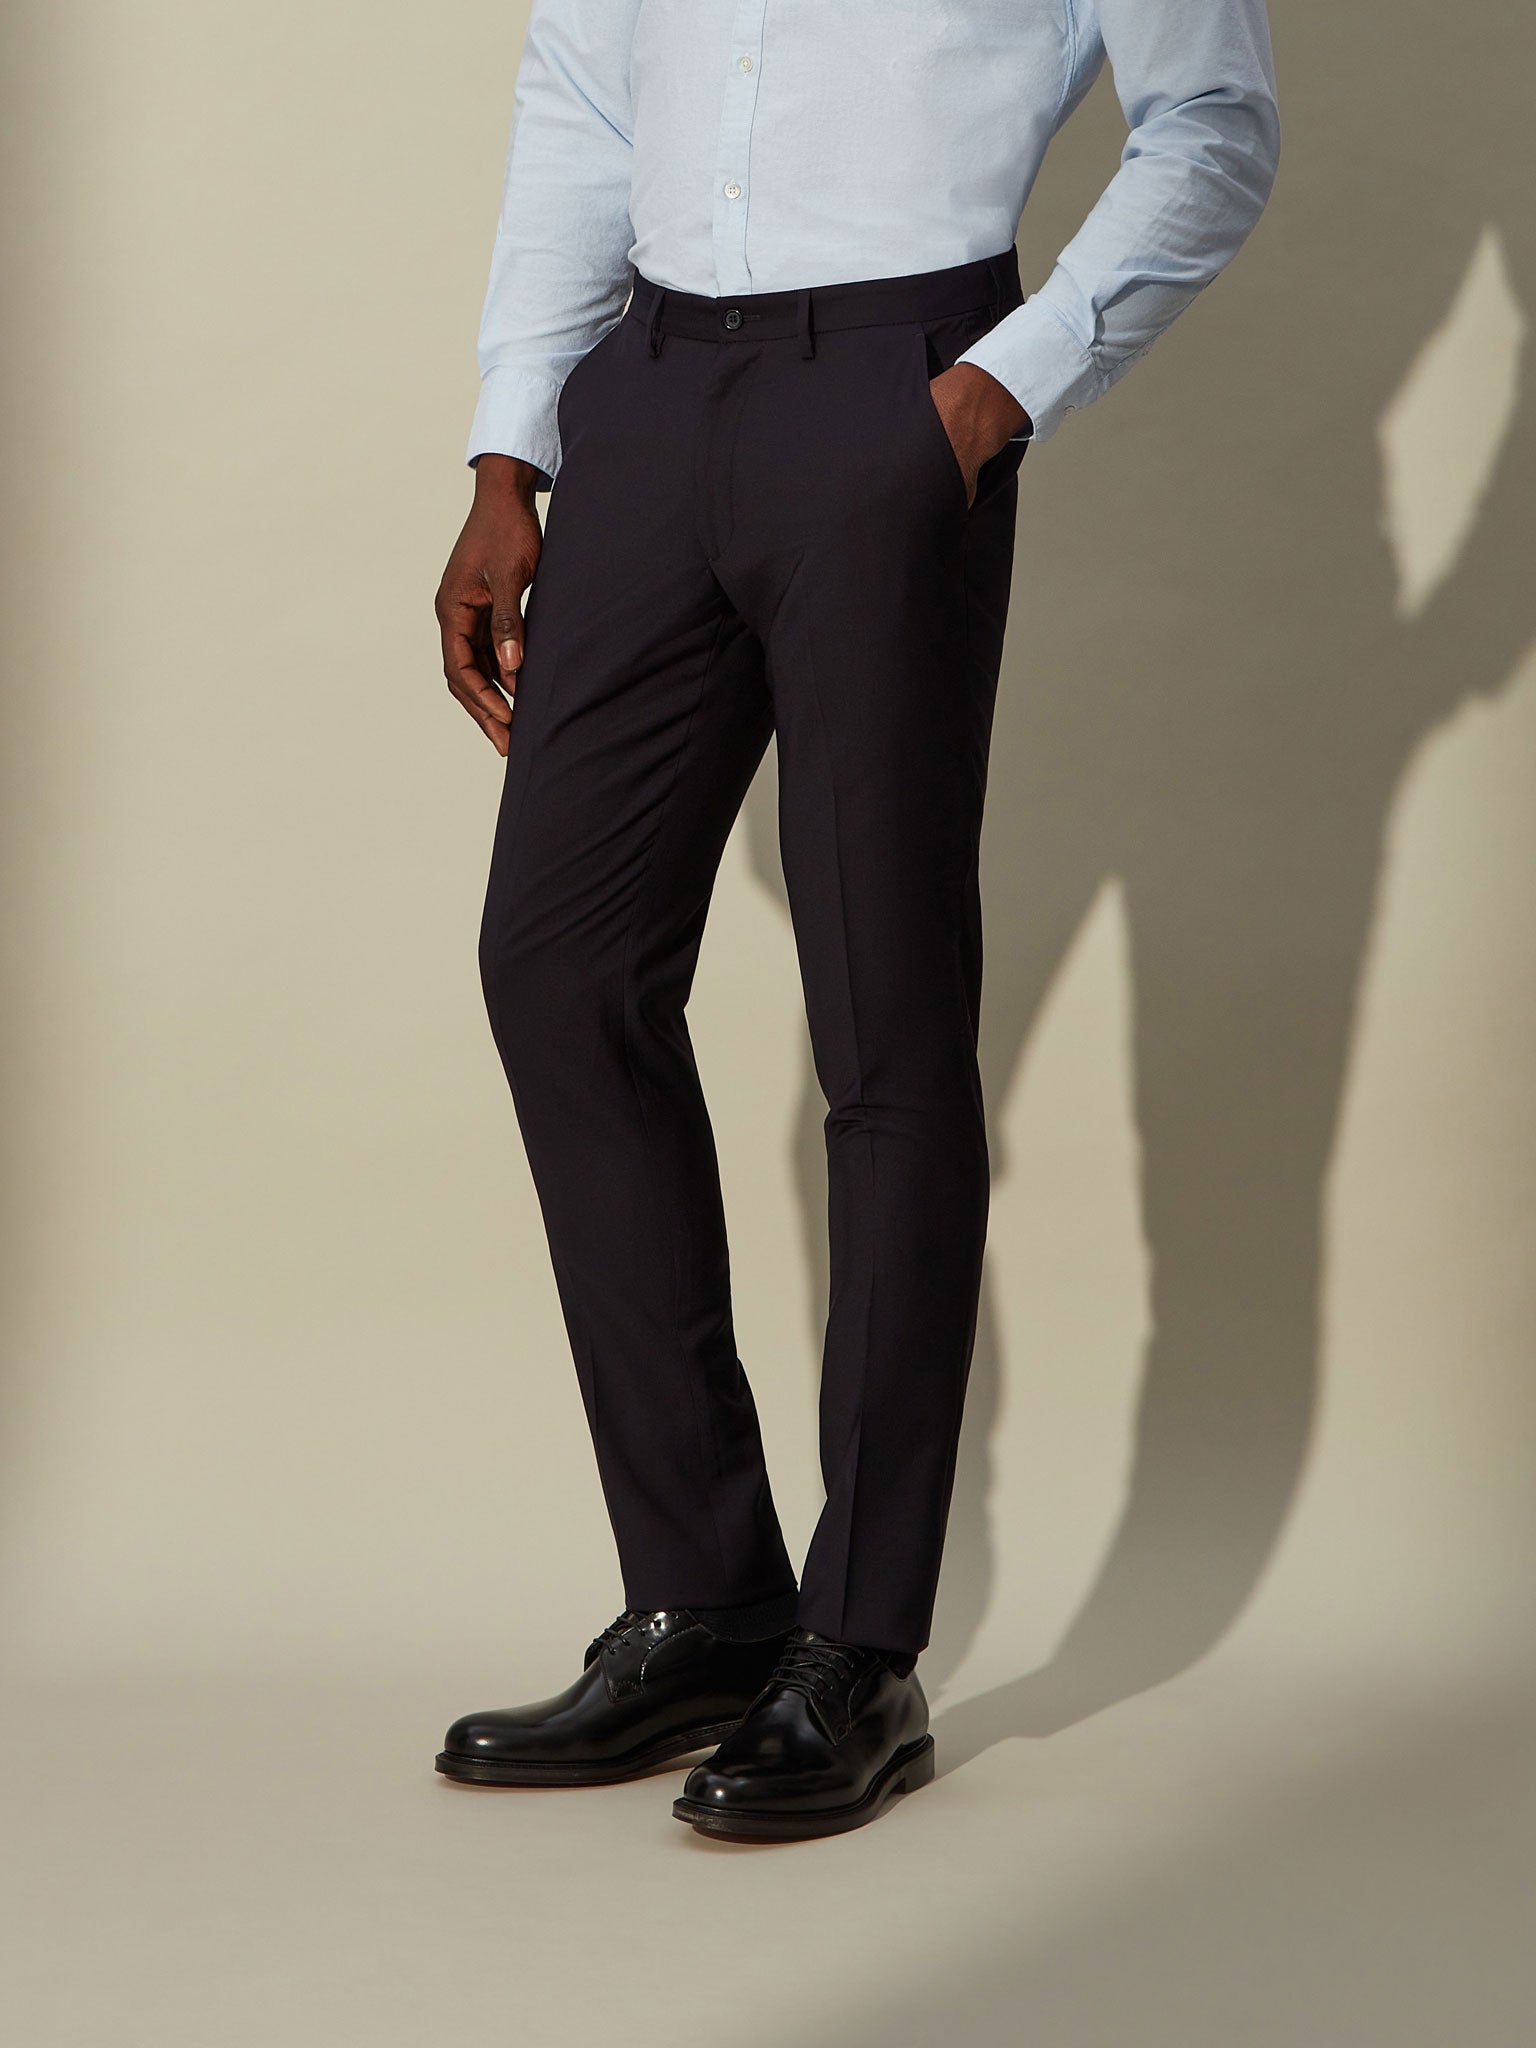 Comfortable men's blue wool trousers with stretch waistband and wrinkle-resistant fabric